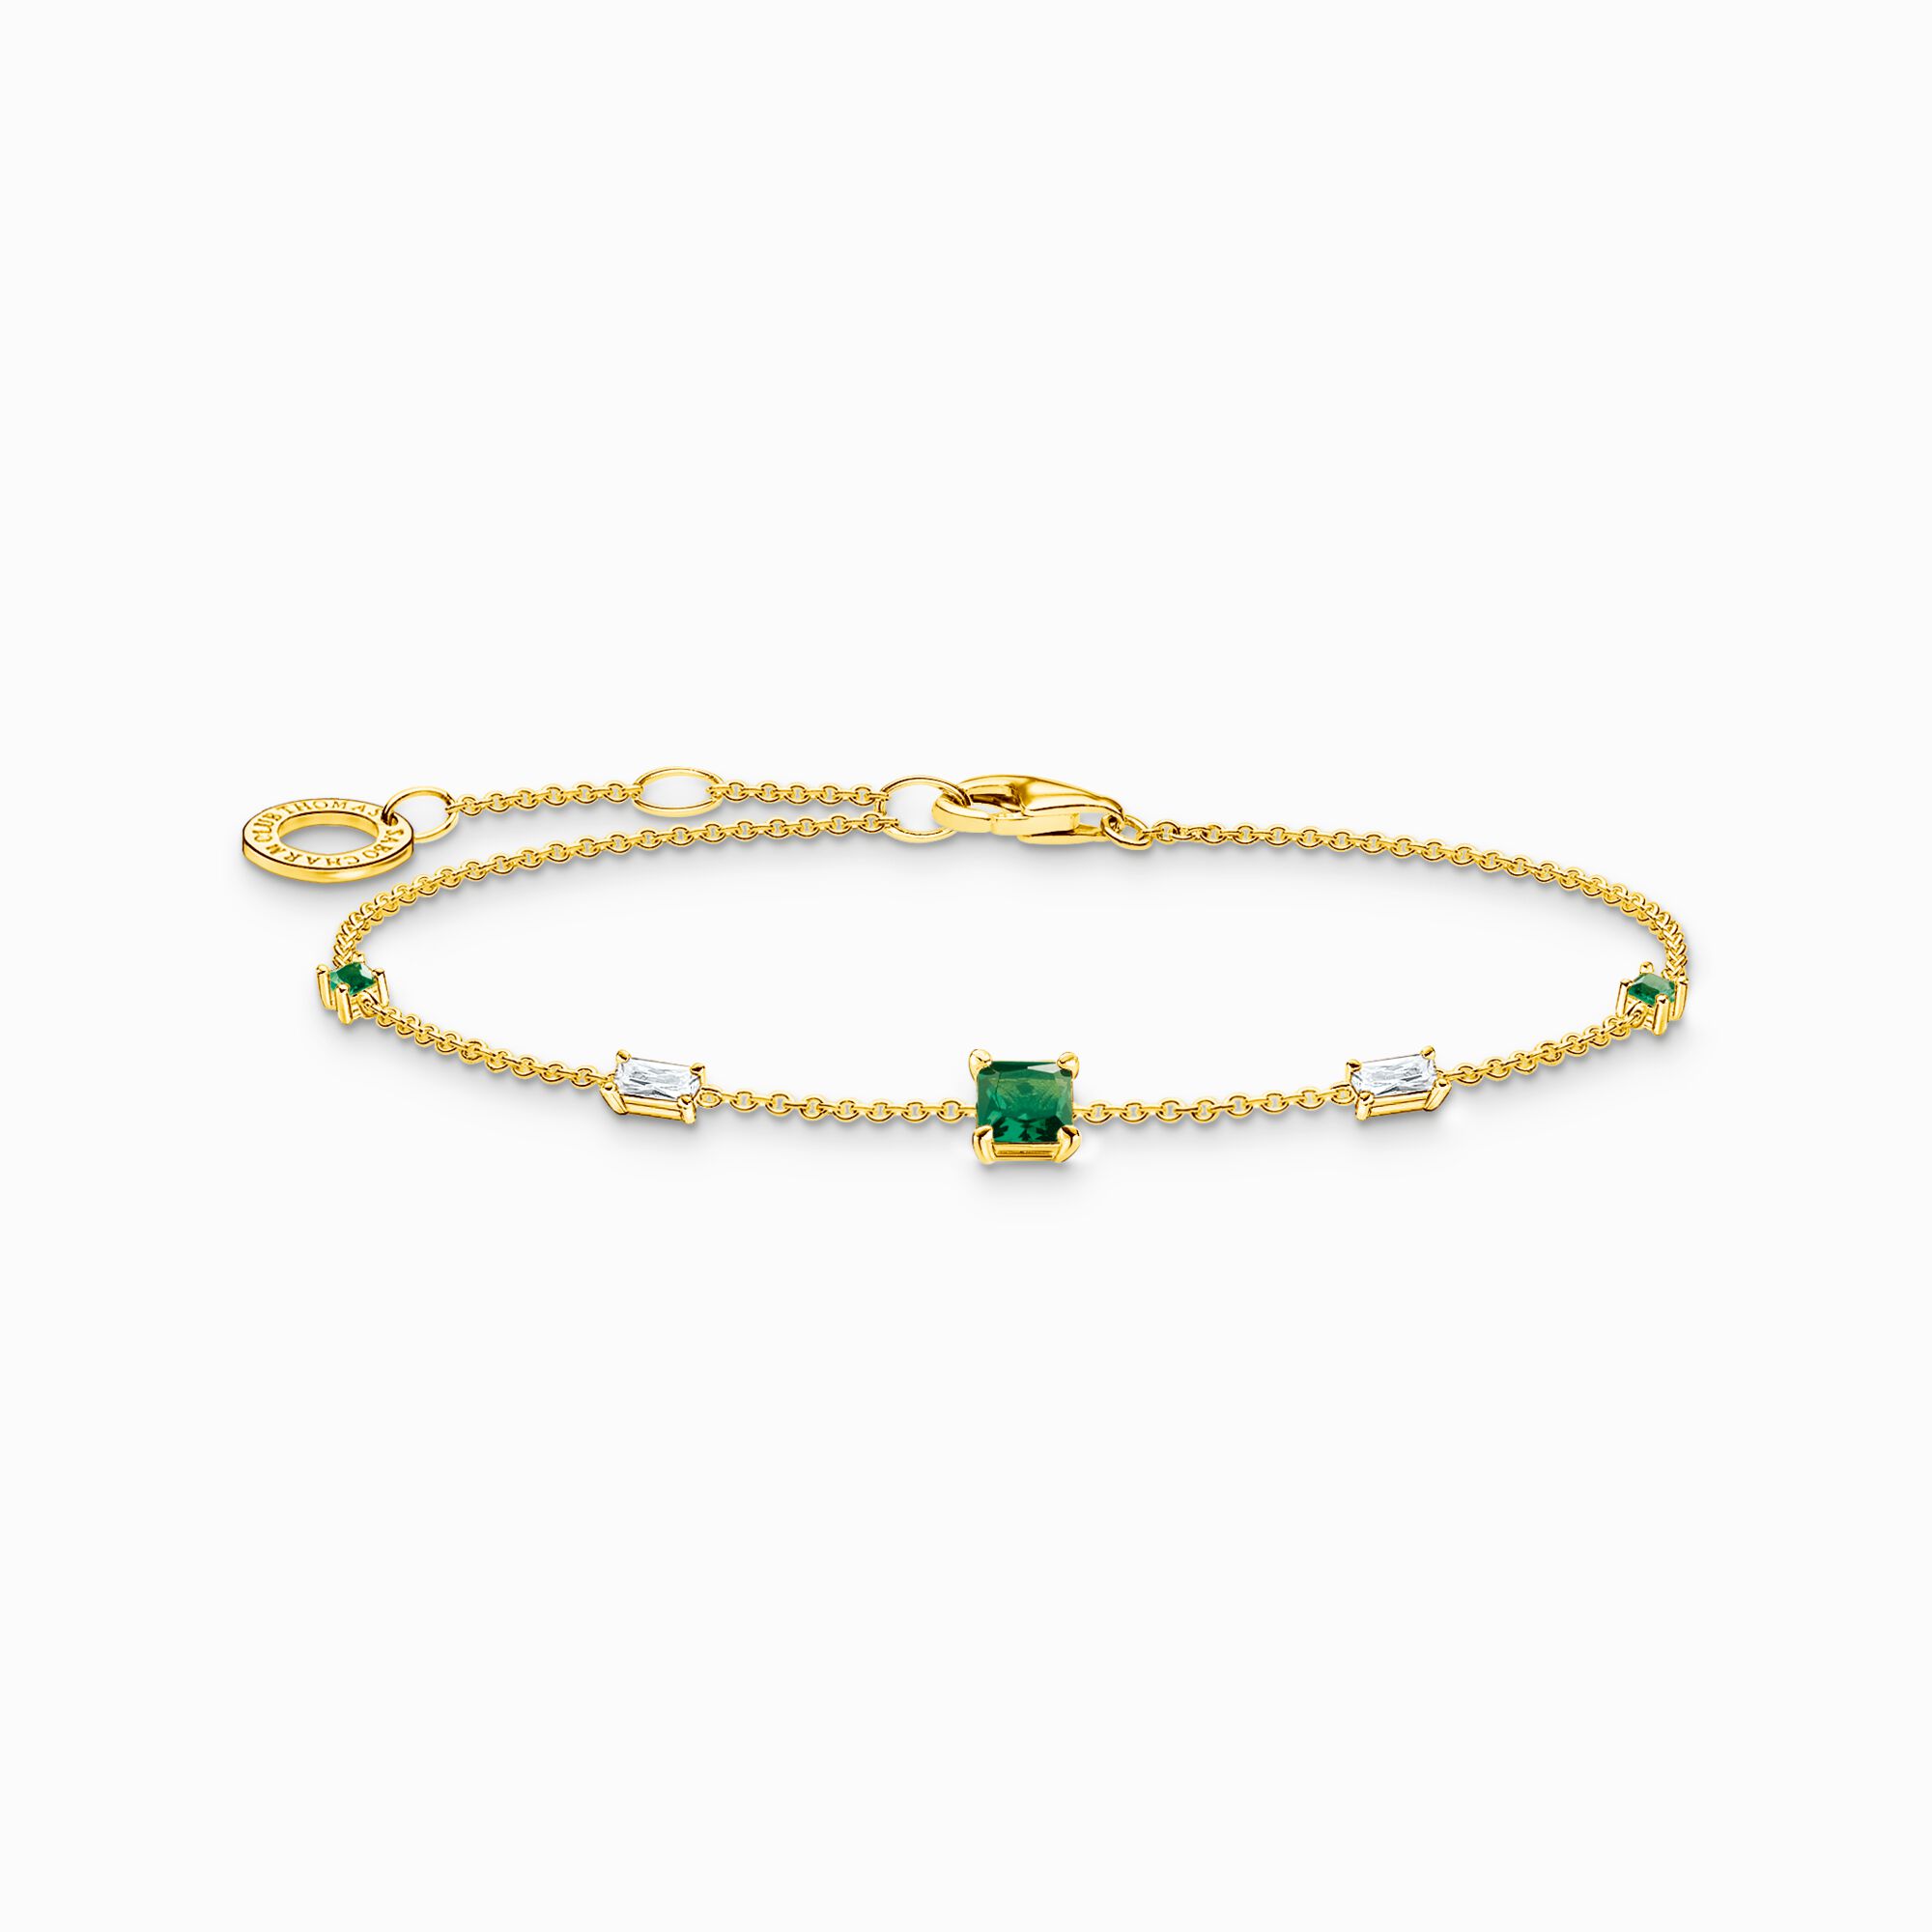 Bracelet with green and white stones gold from the Charming Collection collection in the THOMAS SABO online store